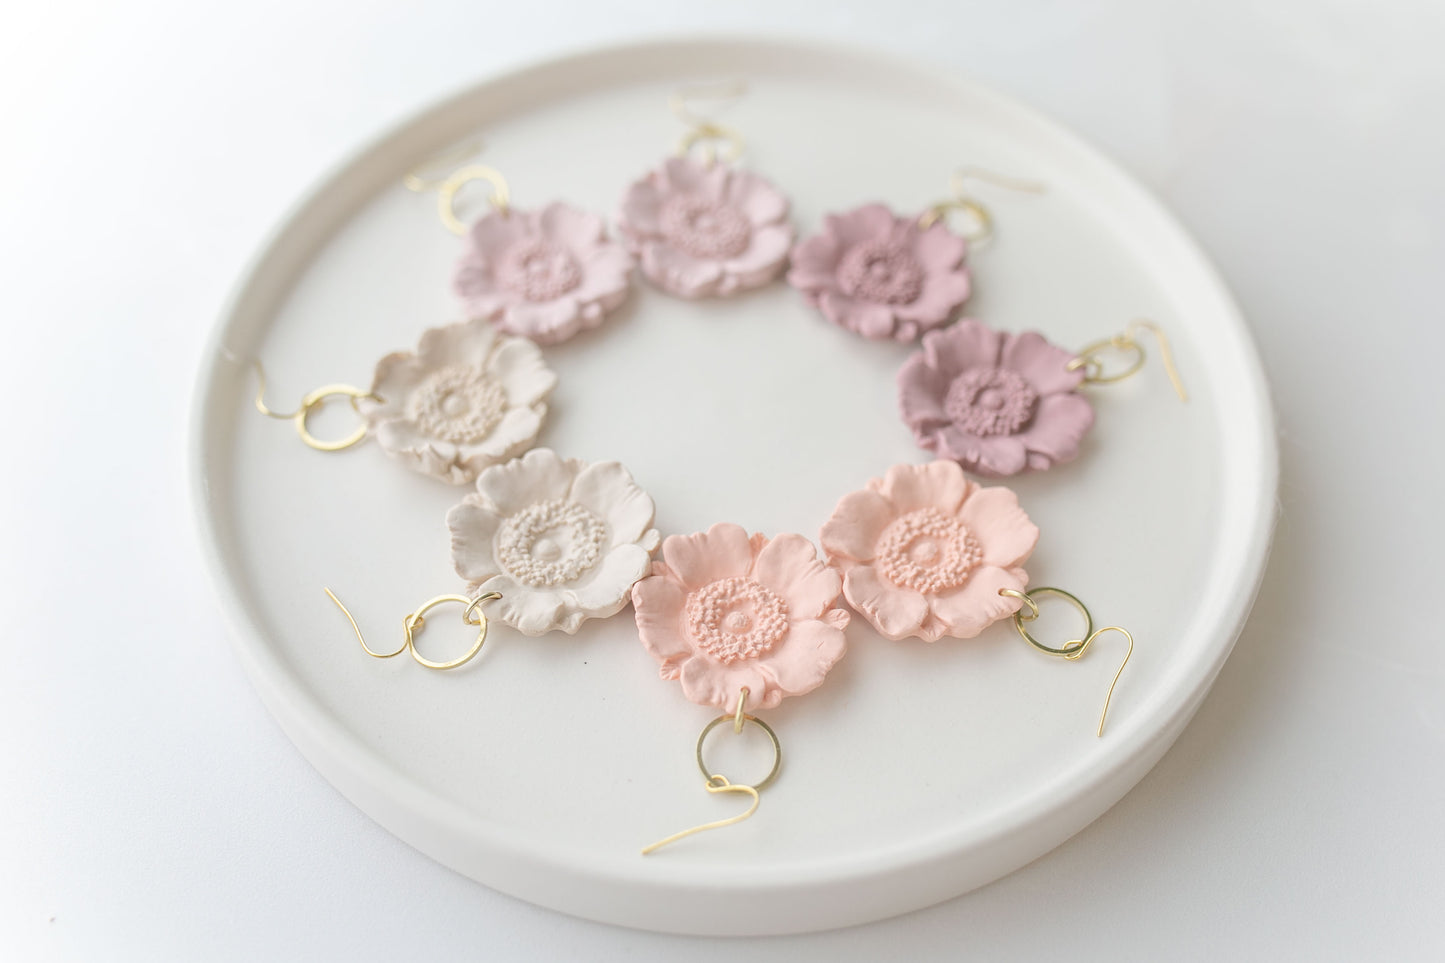 Clay earring | ivory poppy dangles | spring collection